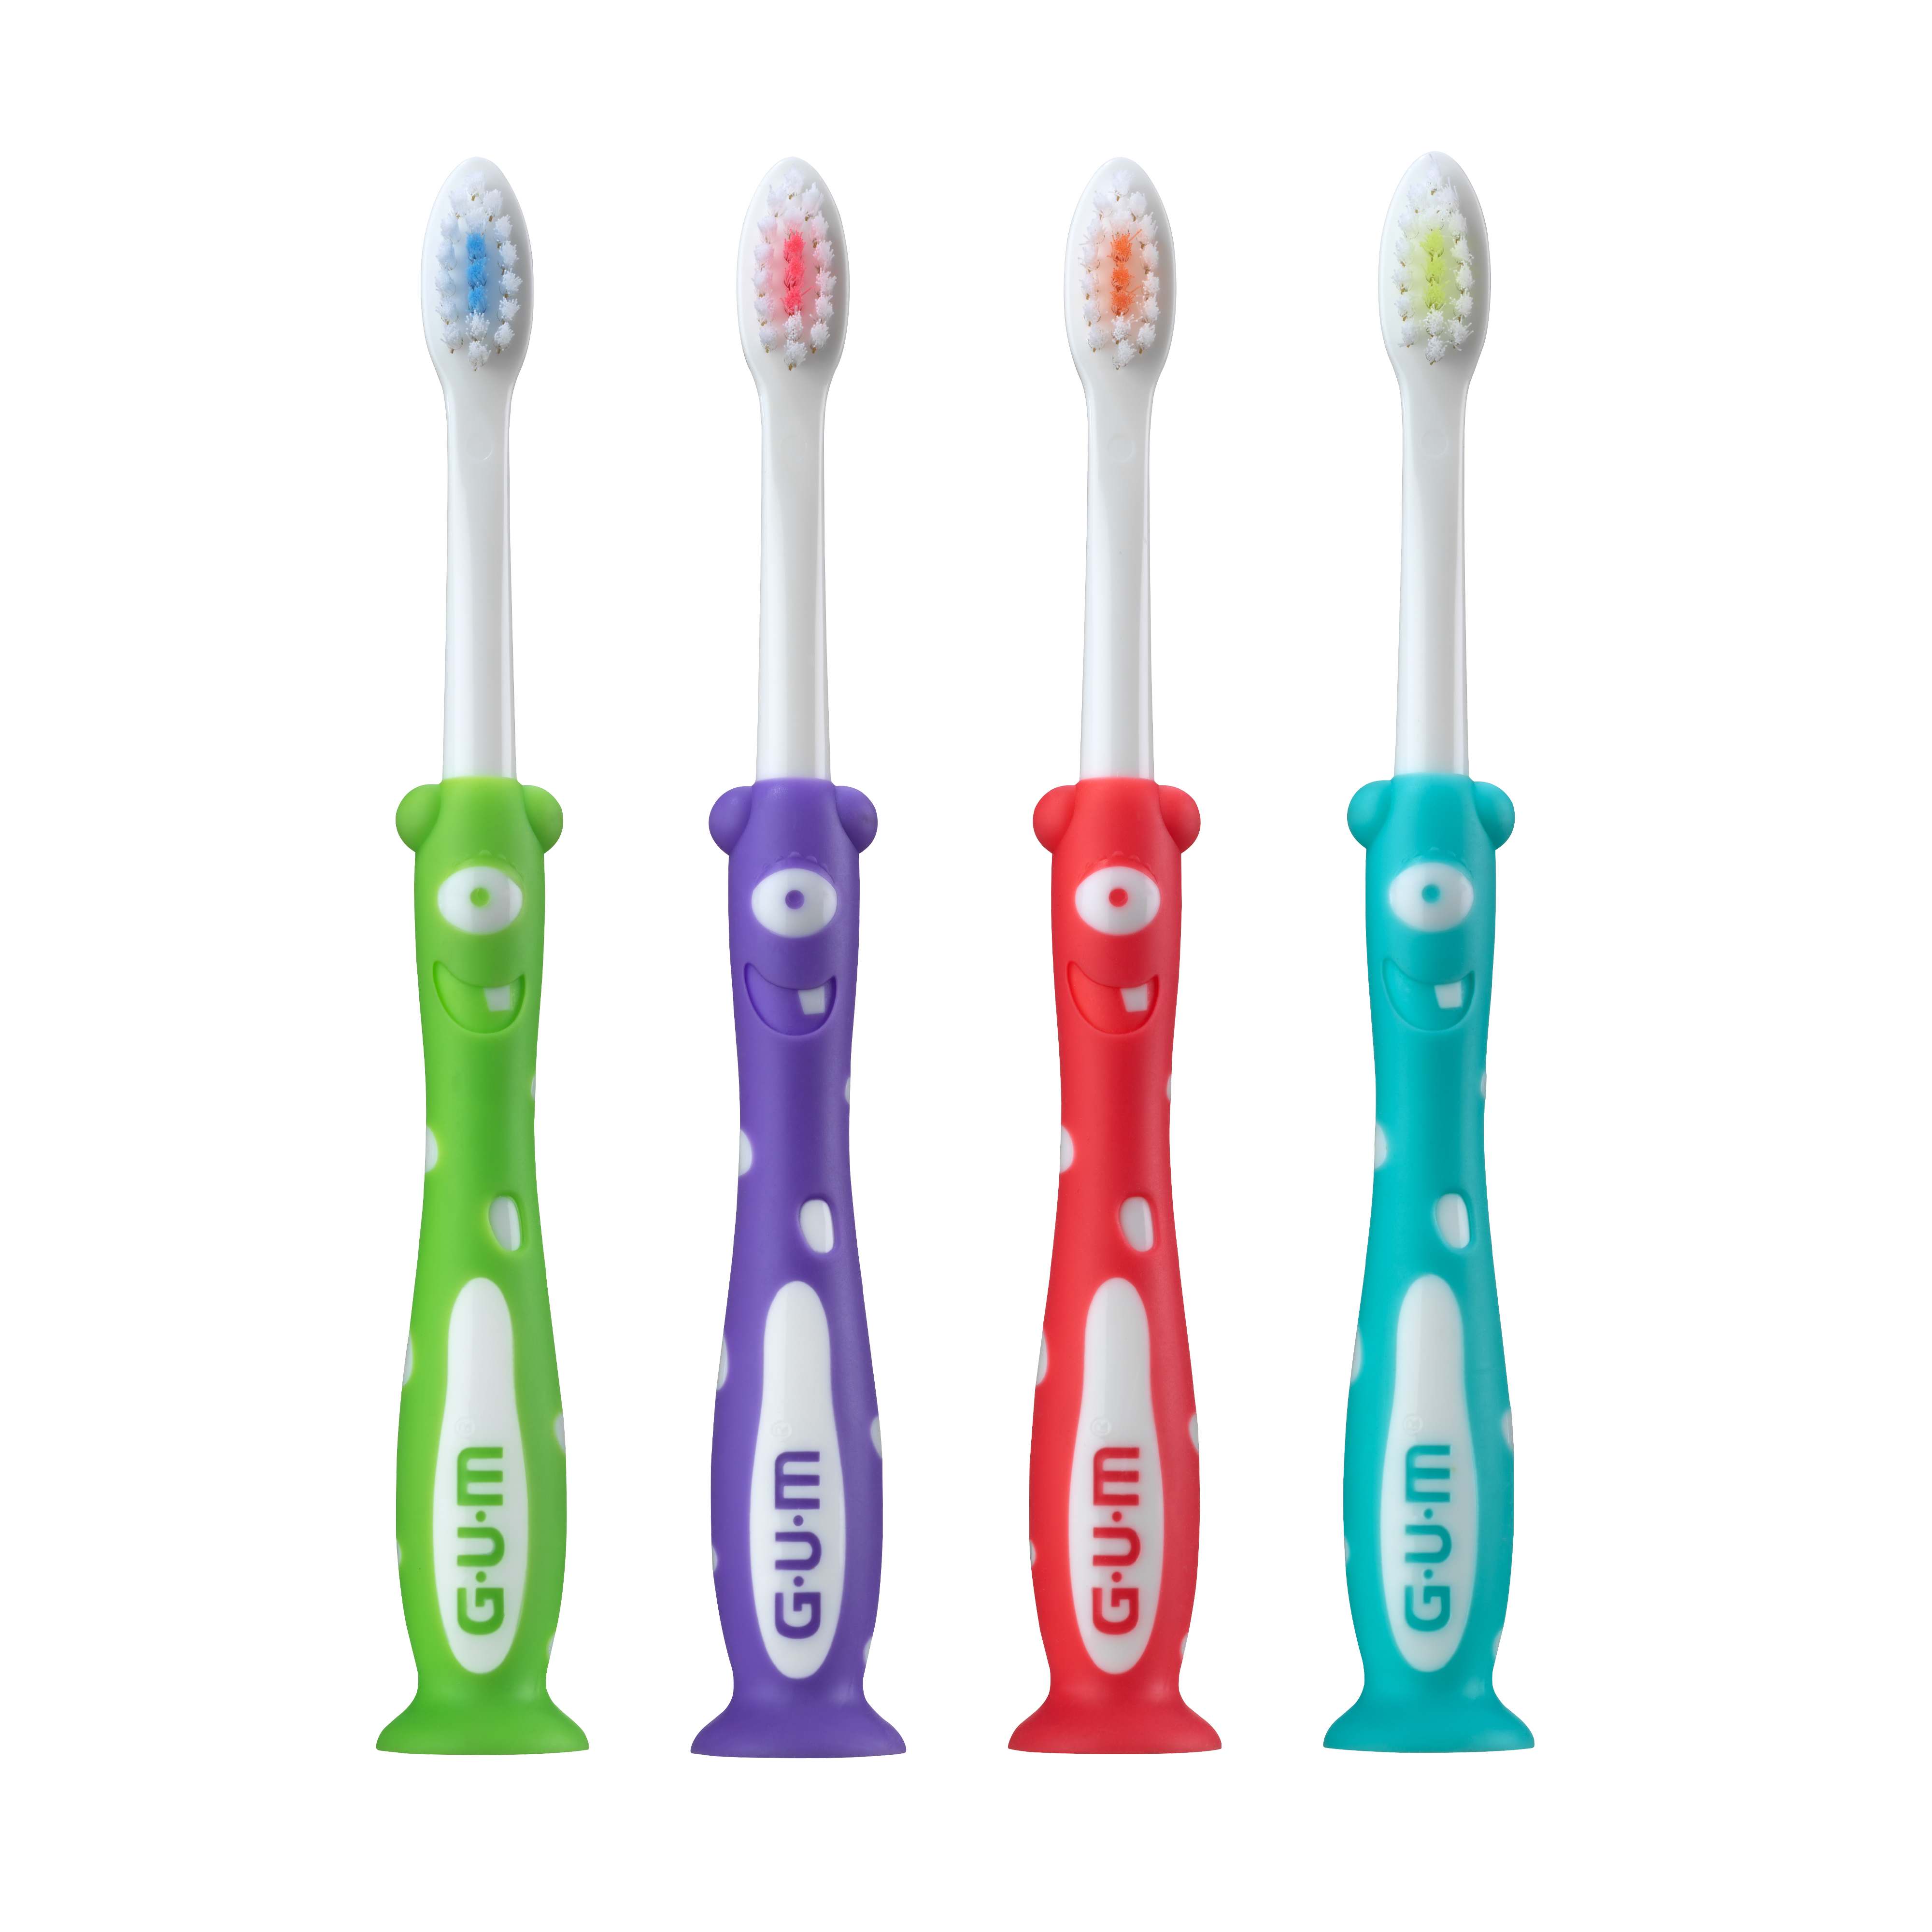 901-Product-Toothbrush-Manual-Monsterz-Kids-naked-4colors.jpg